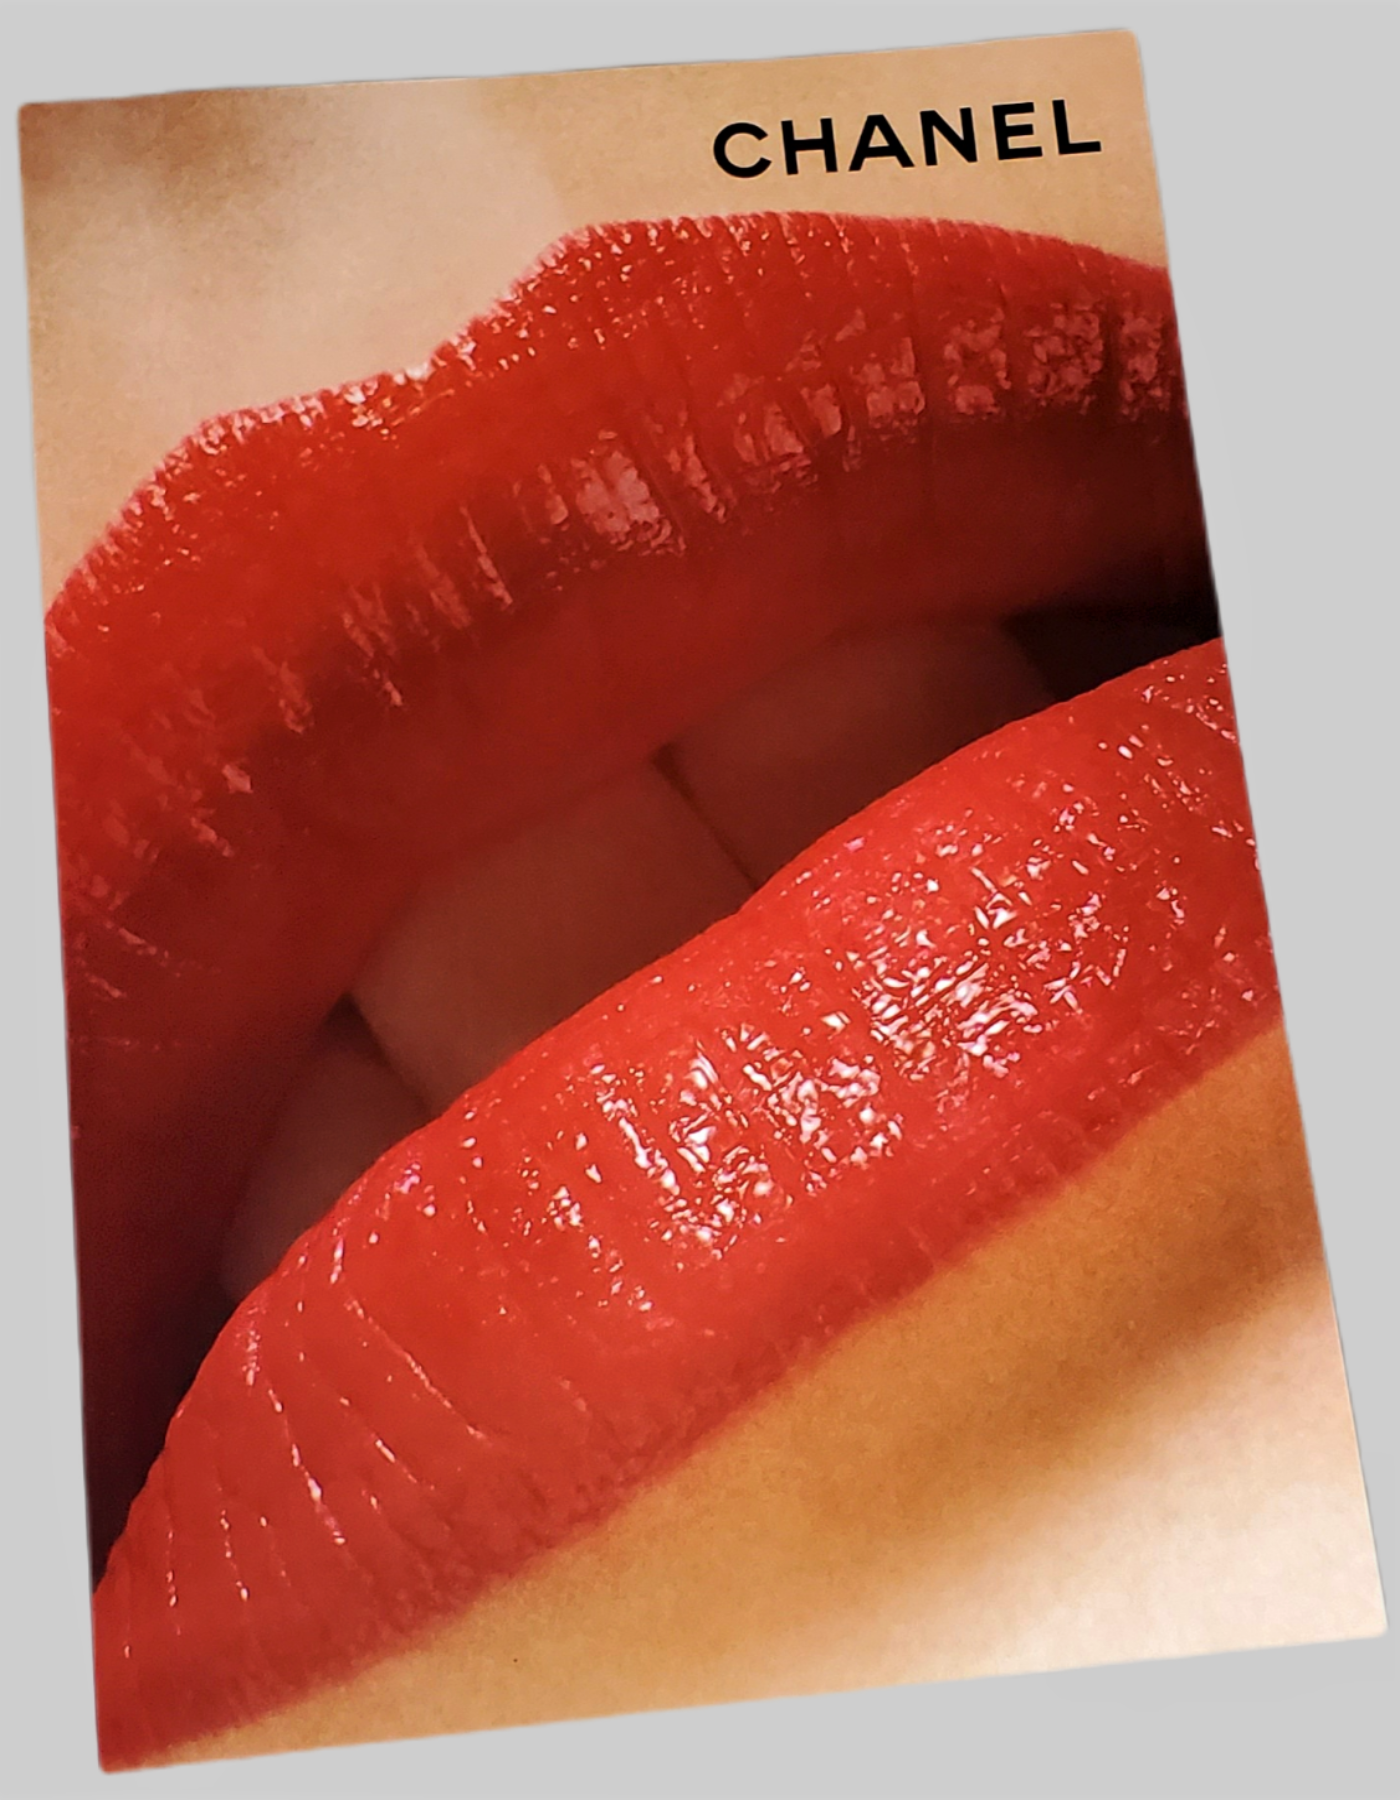 Chanel Rouge Coco Lip Color Ad For Sale Vogue Magazine – AREA51GALLERY